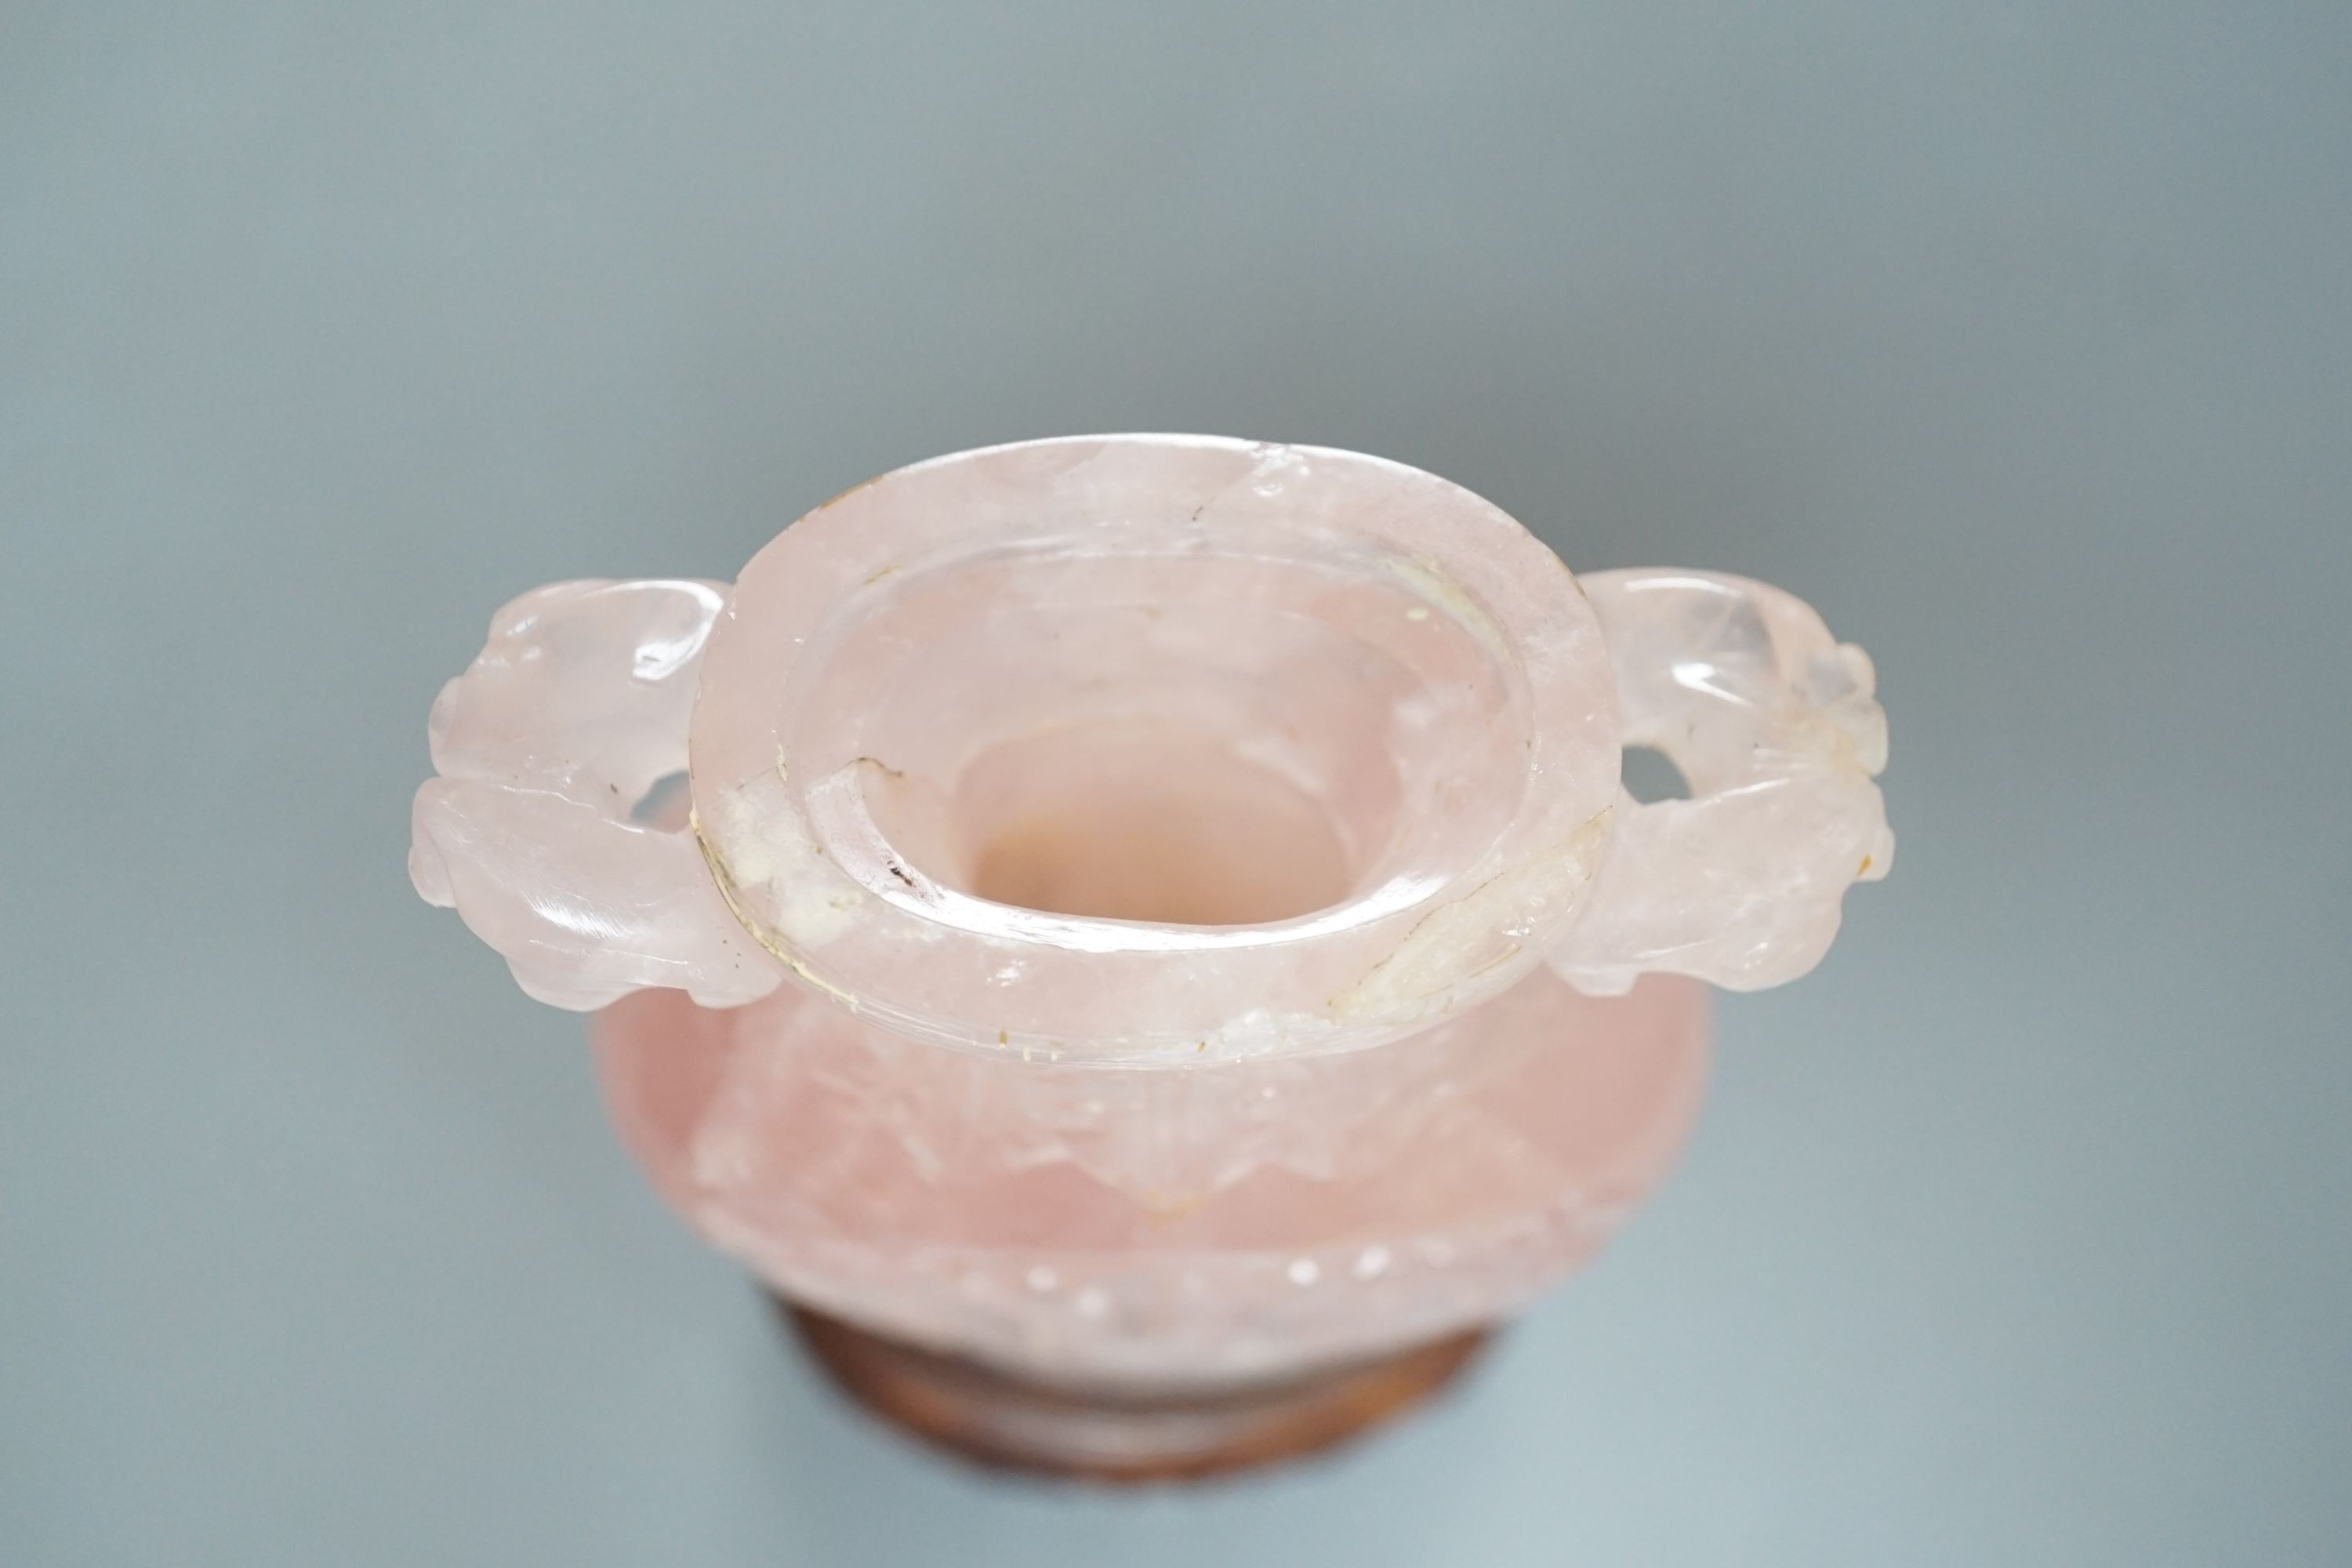 A late 19th/early 20th century Chinese carved rose quartz vase and cover, on a Hongmu stand, 23.5 cm high including stand.